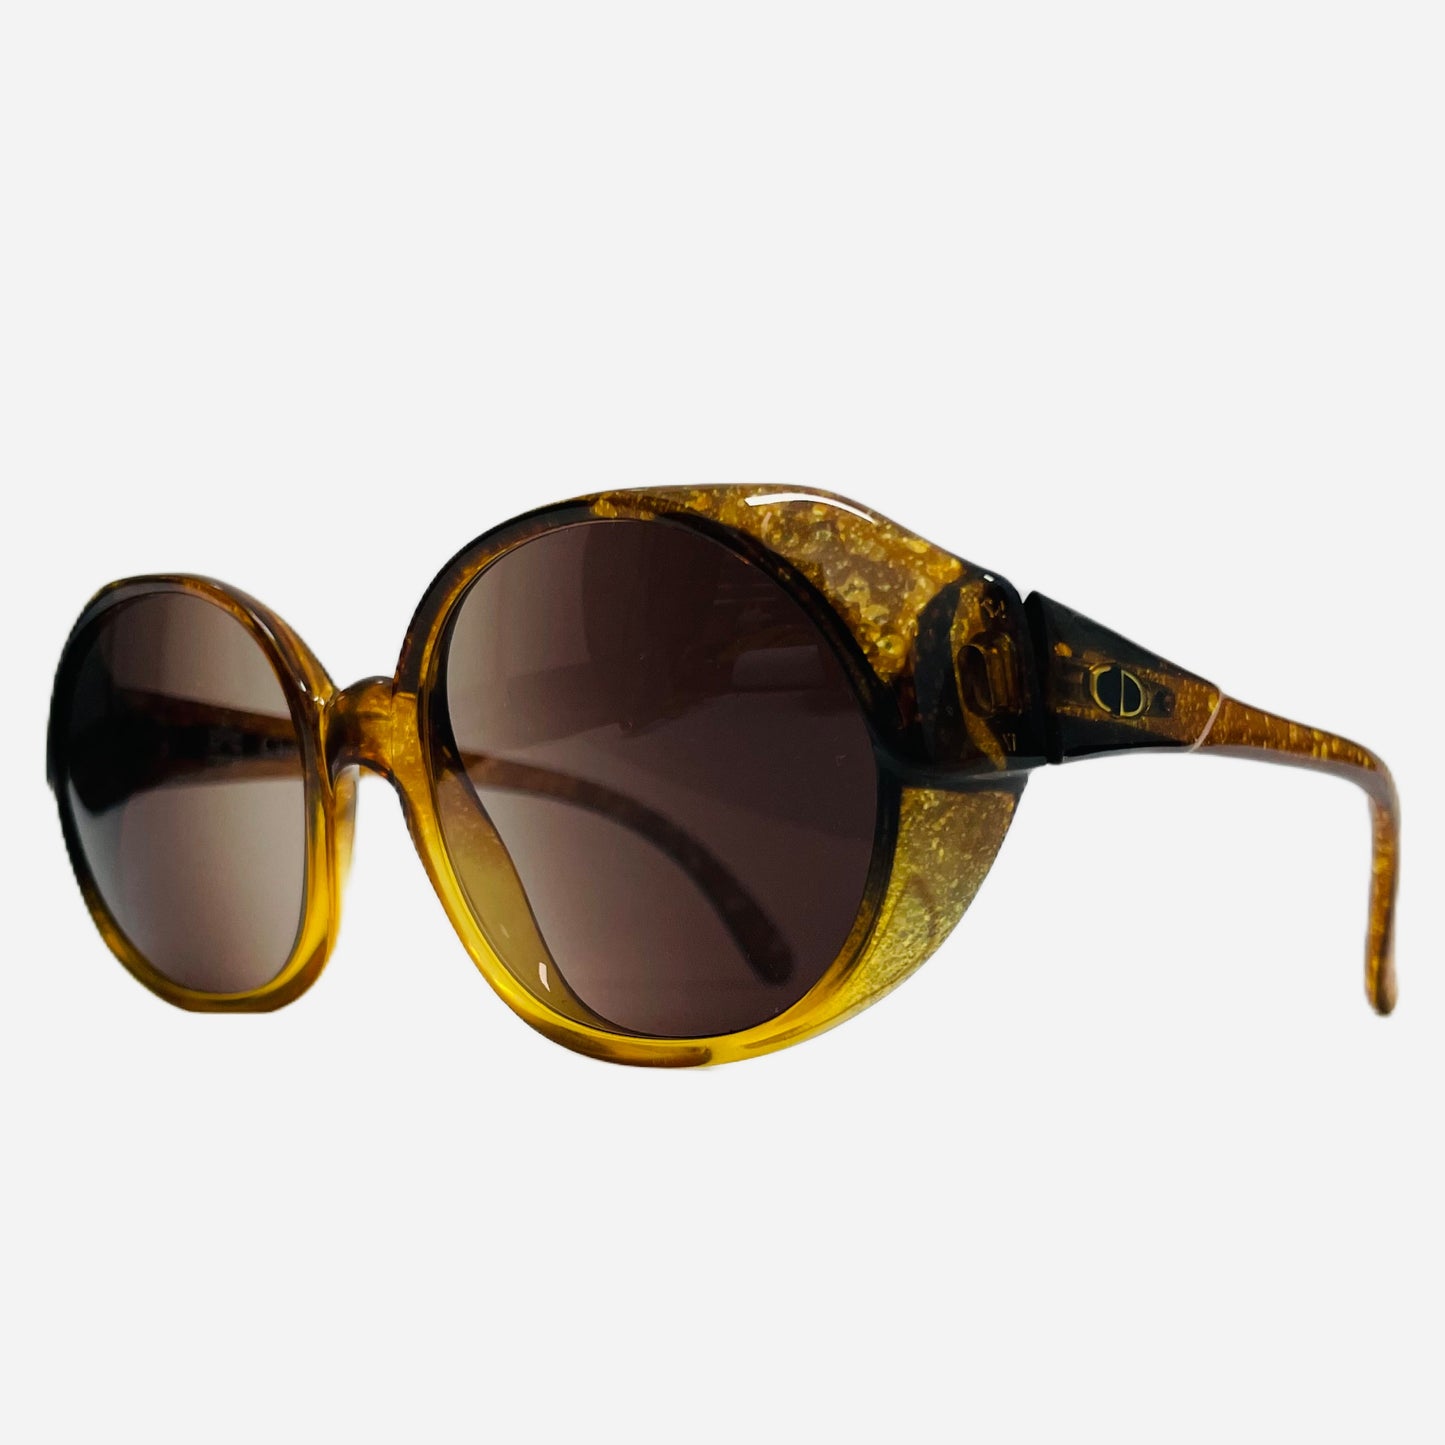 Vintage-Christian-Dior-Sonnenbrille-Sonnenbrille-2019-Optyl-the-seekers-front-side